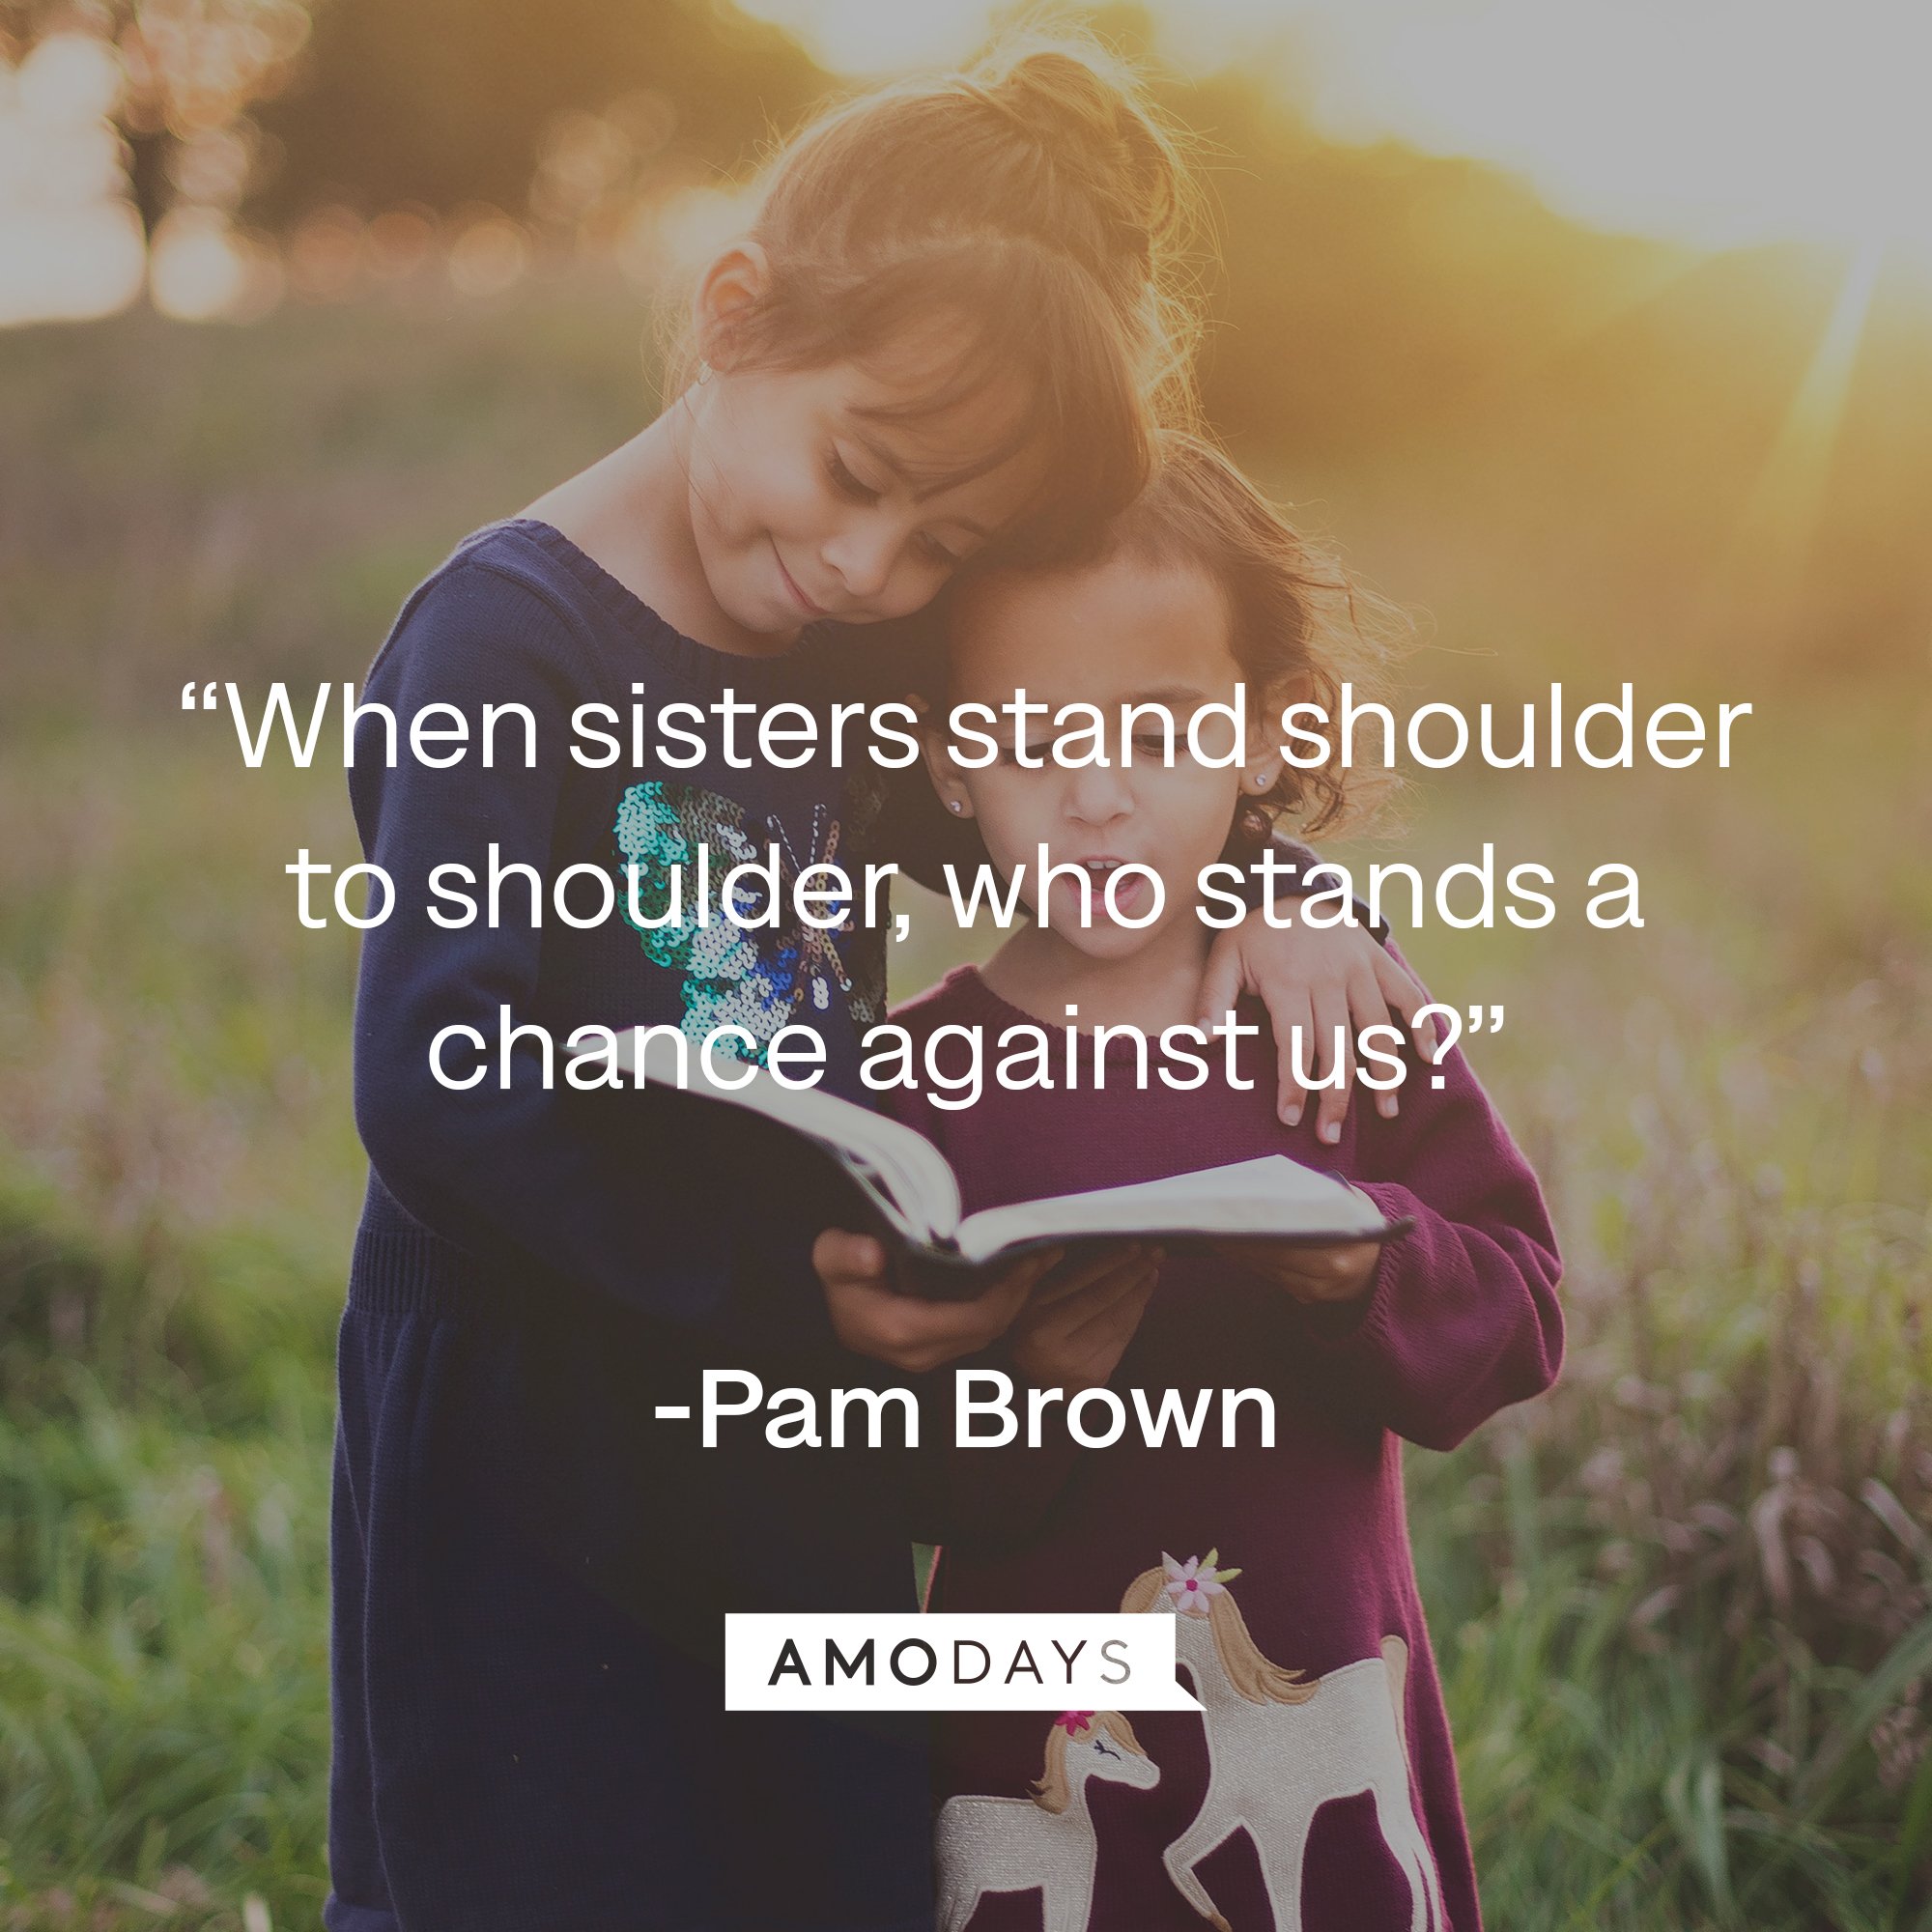 Pam Brown's quote: “When sisters stand shoulder to shoulder, who stands a chance against us?” | Image: AmoDays